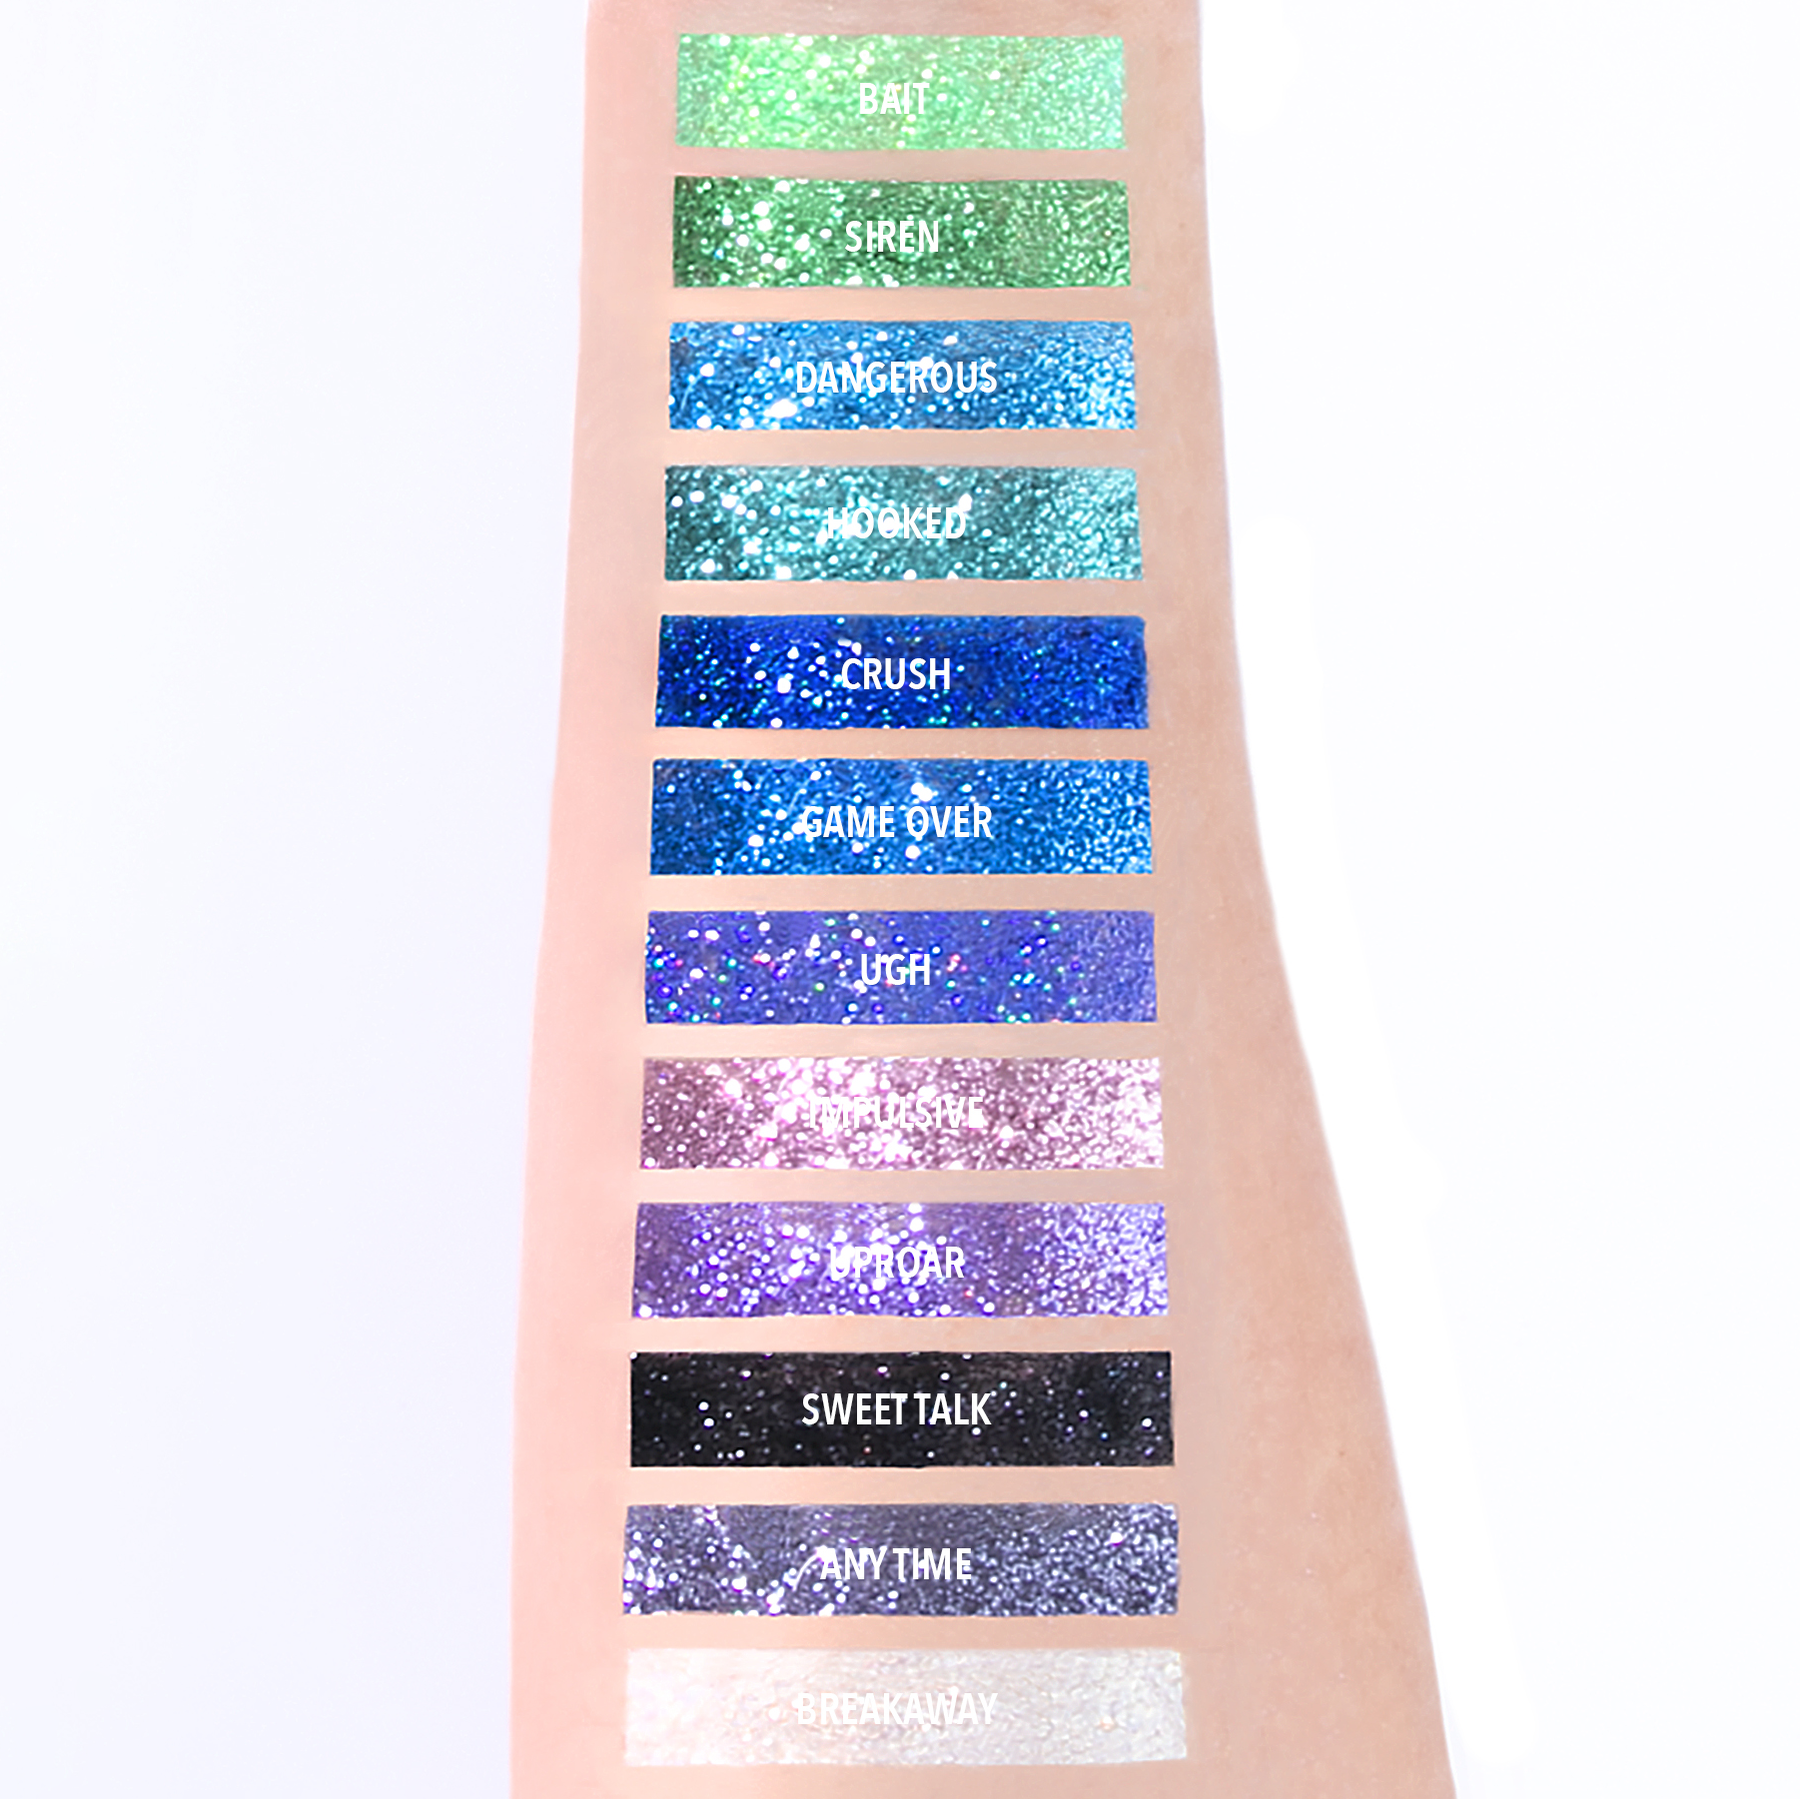 Moira Beauty - Loose Control Glitter Game Over